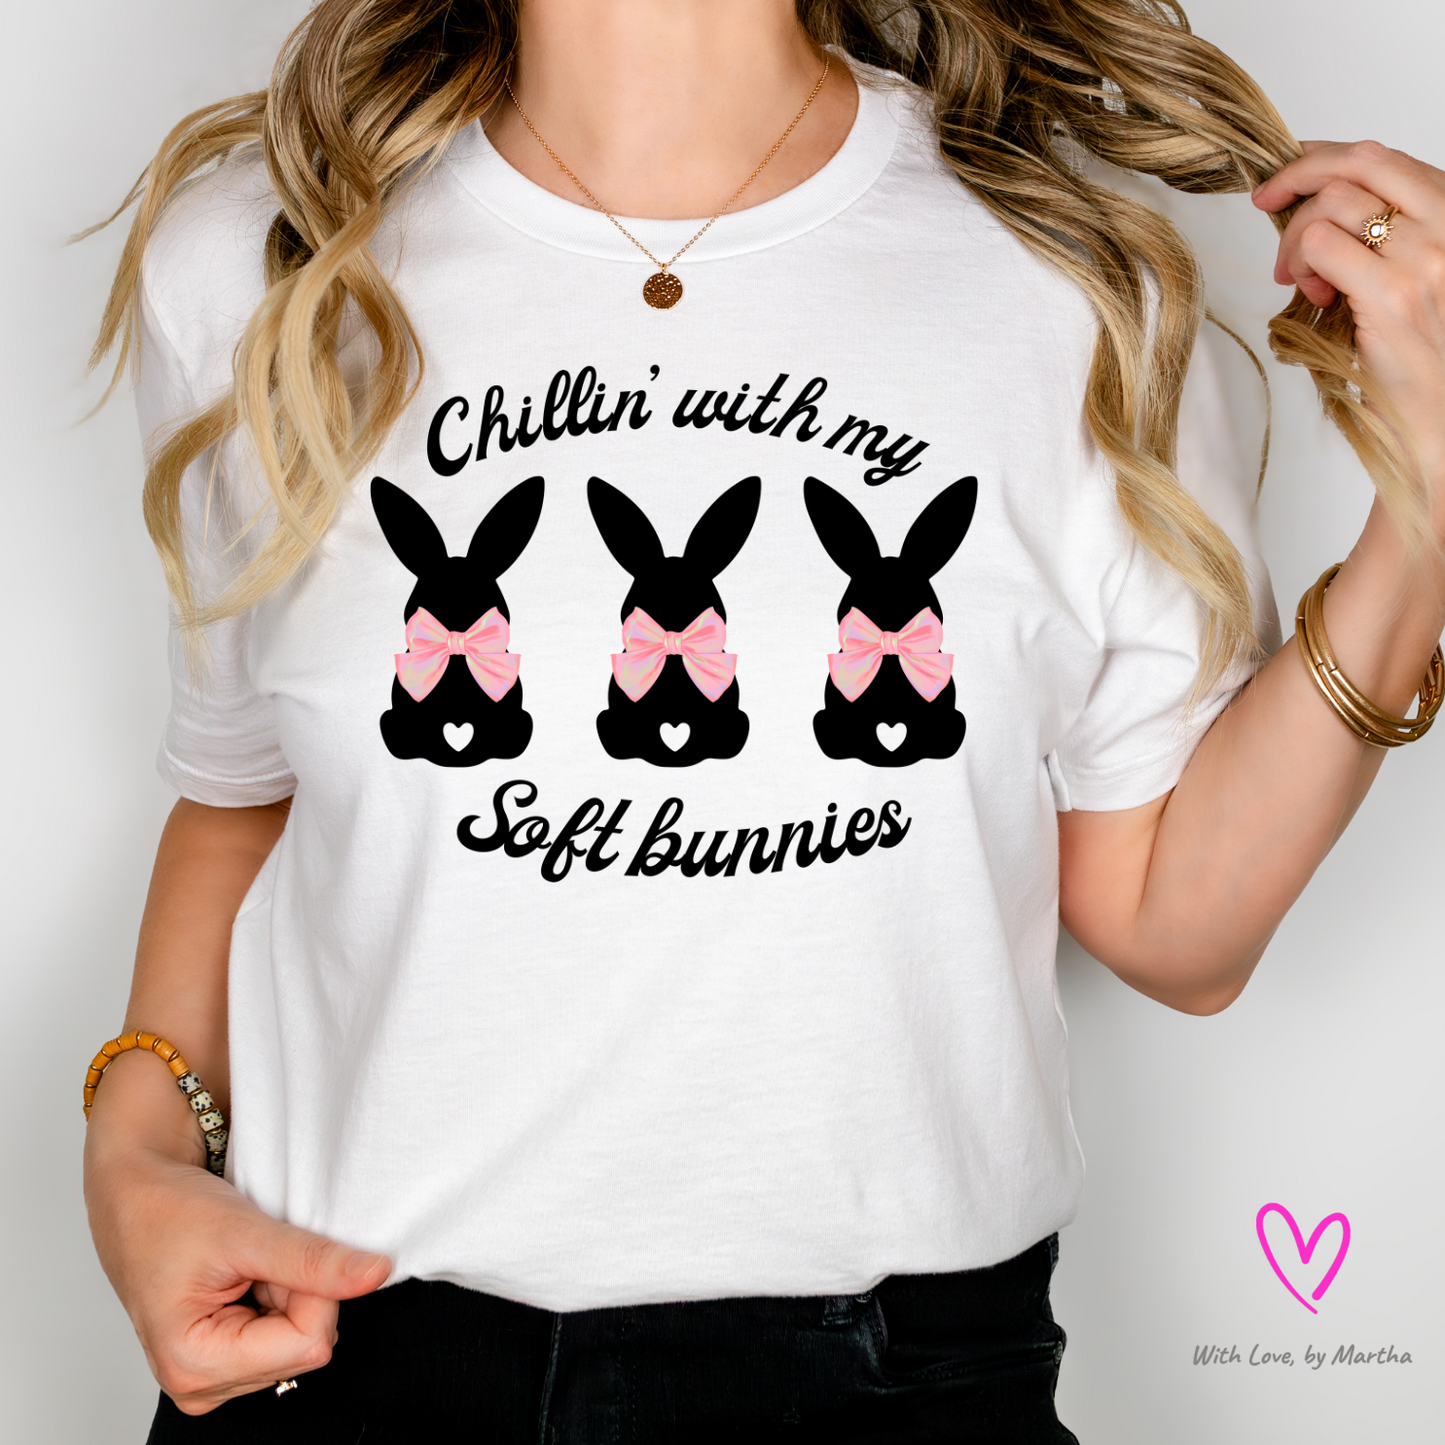 Chillin' with my soft bunnies T-shirts